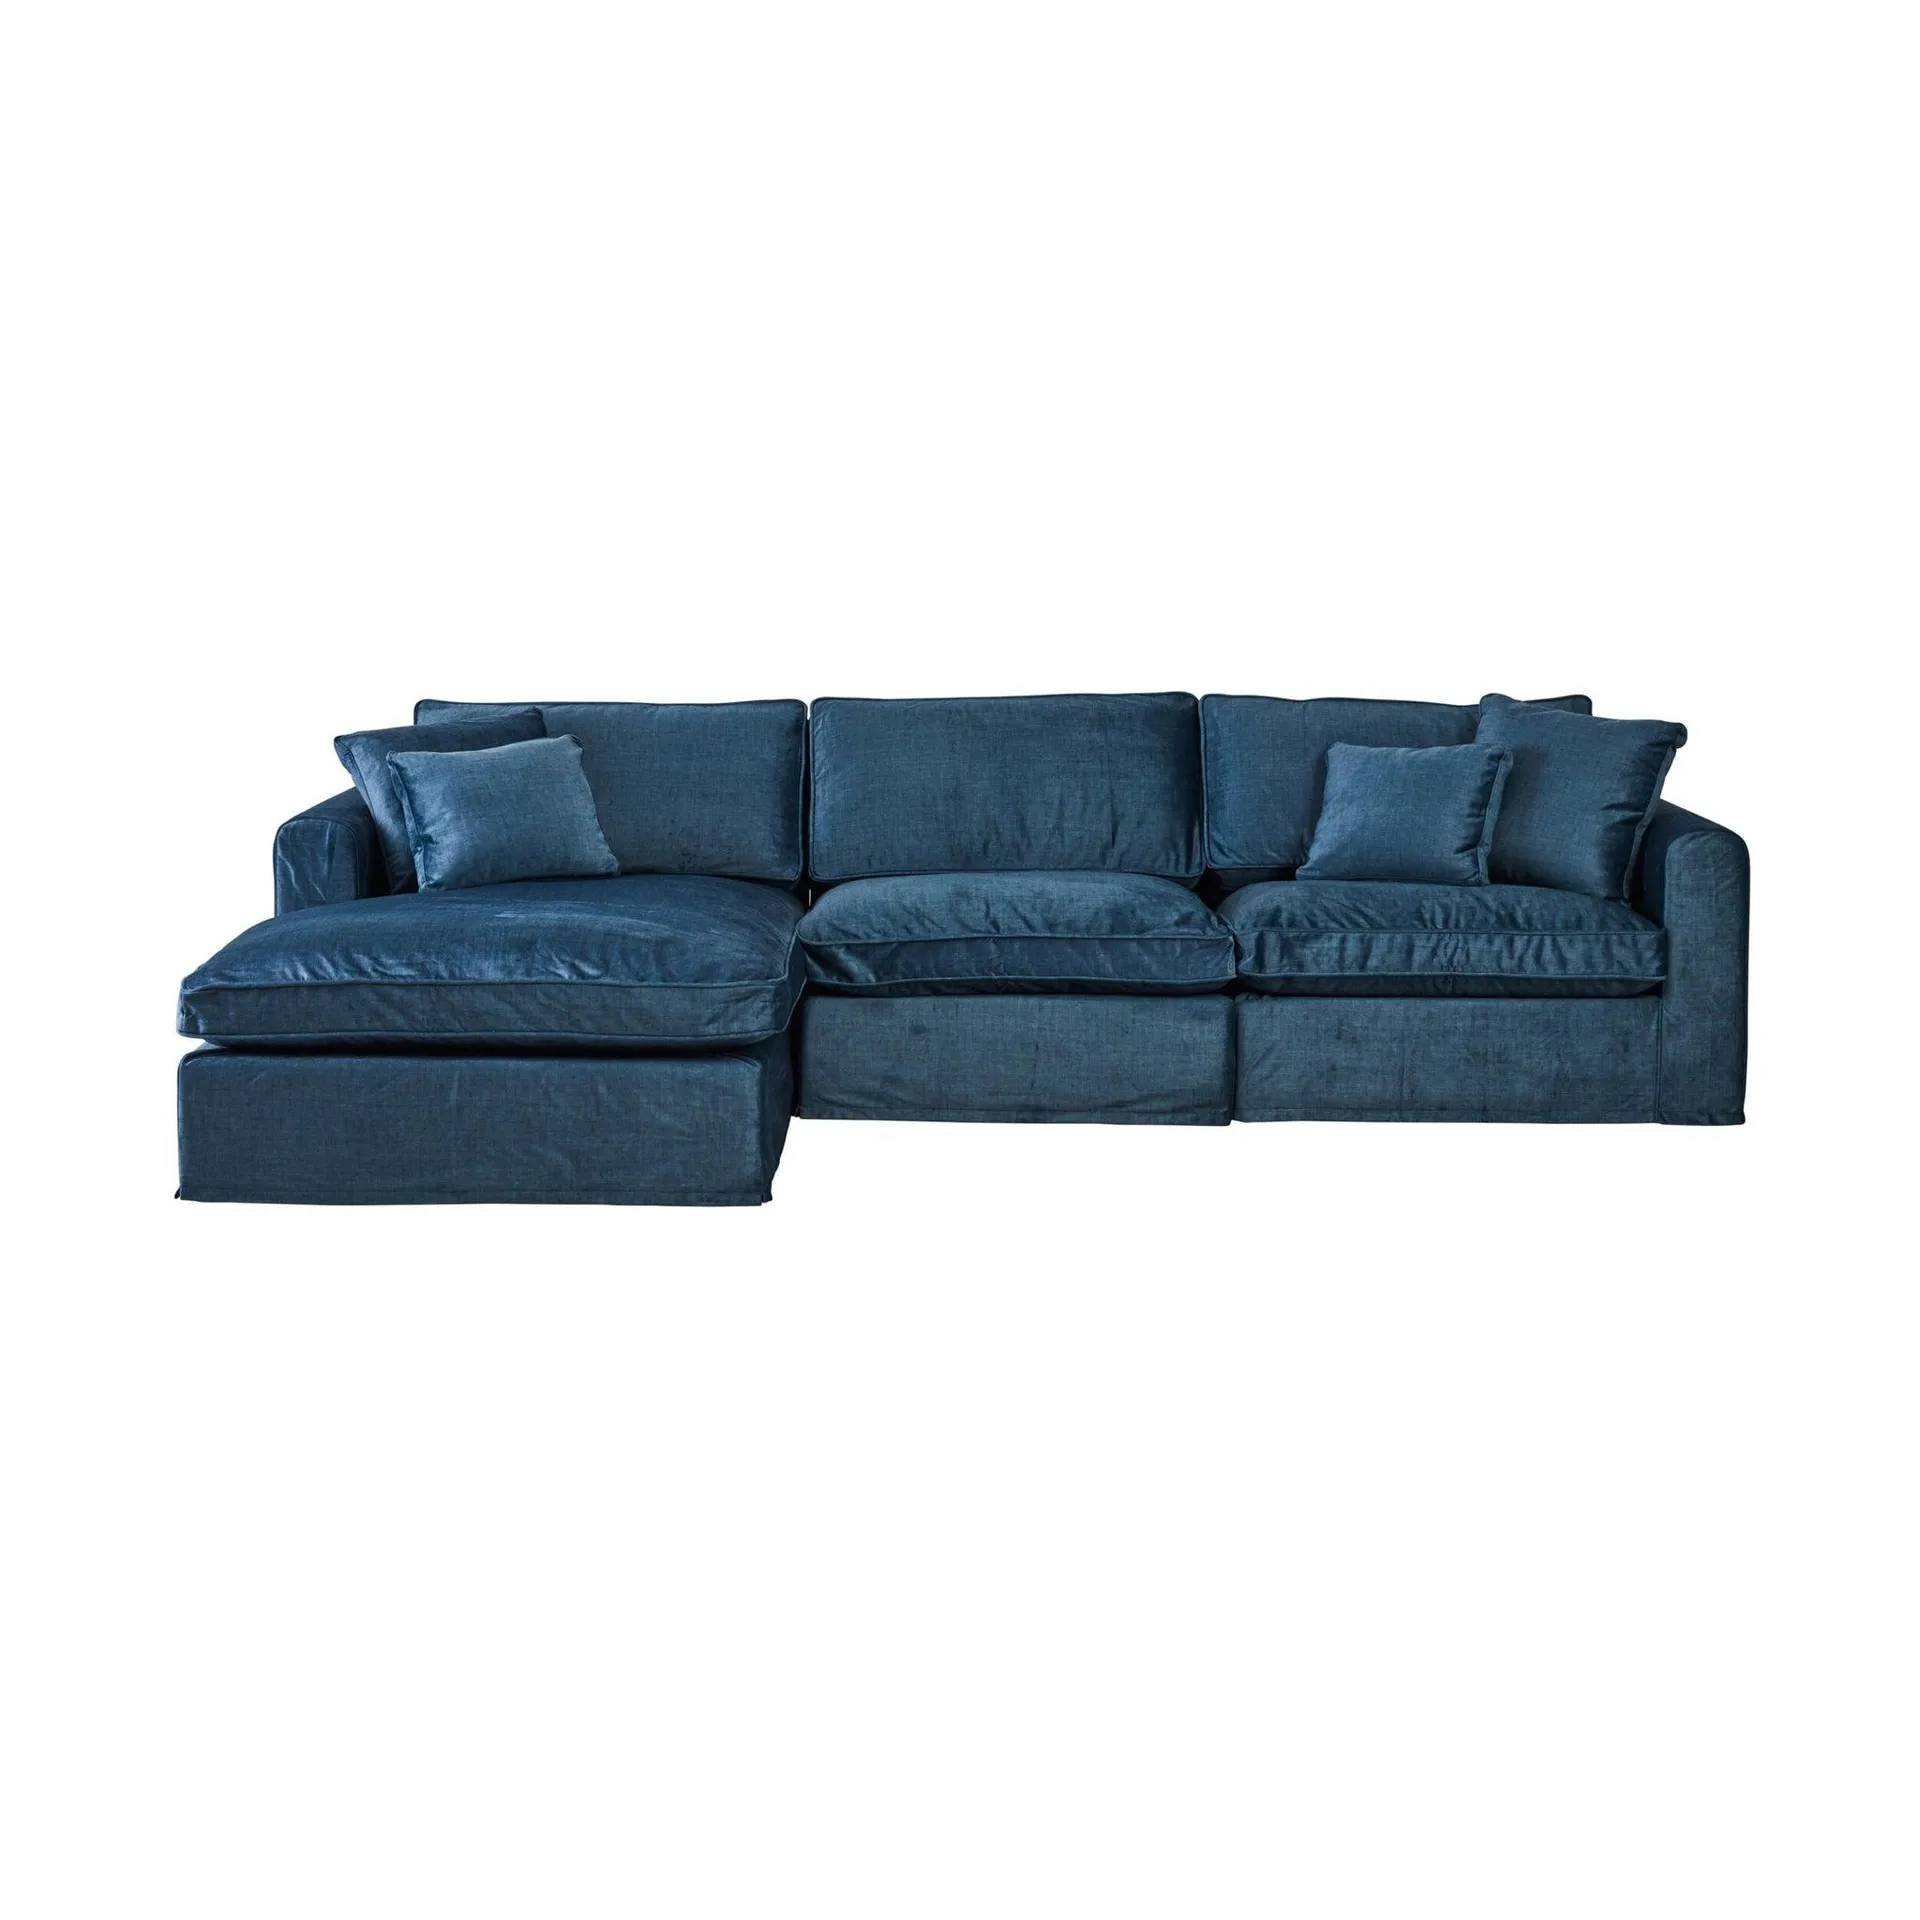 Huxley 3 Seater Velvet Sofa with Left Chaise Luxe Marine Blue C-006